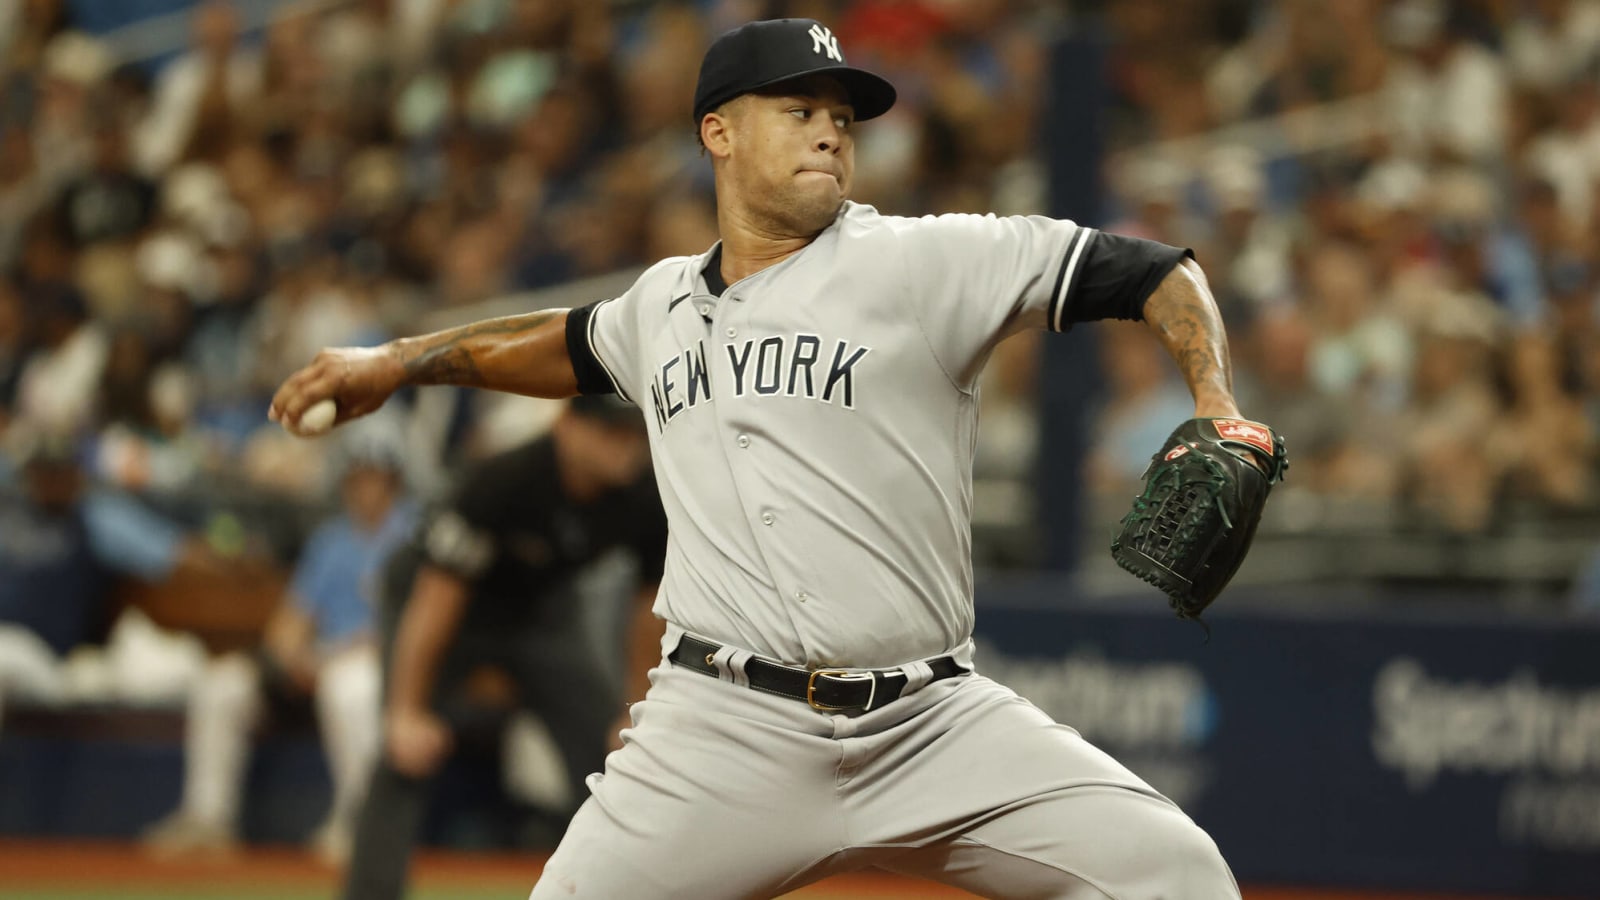 Oswald Peraza, Frankie Montas added to ALCS roster as Yankees set to take  on Astros – The Morning Call